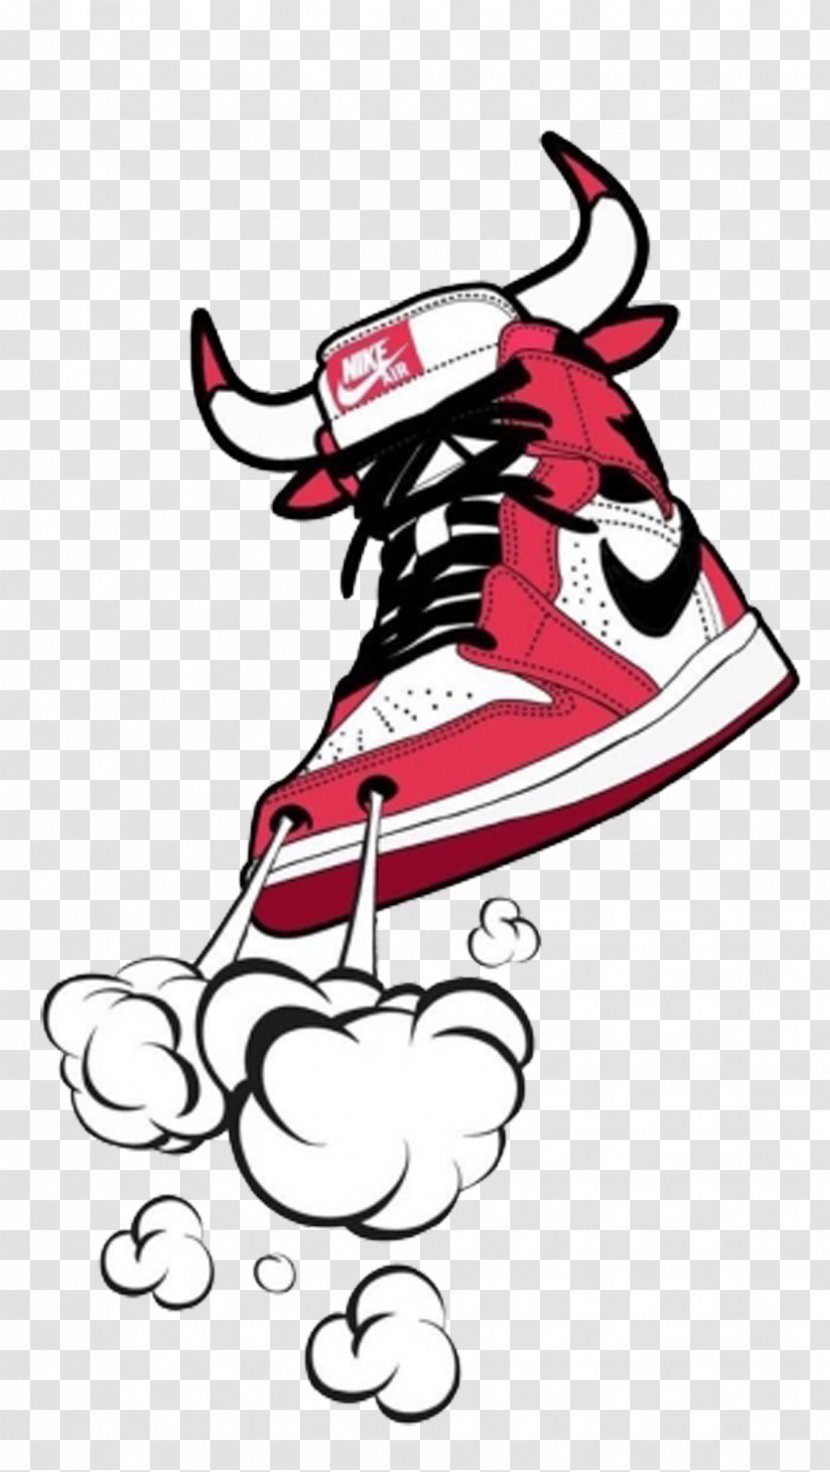 Cattle Chicago Bulls Sneakers Illustration - Watercolor - Decorative Shoes Transparent PNG